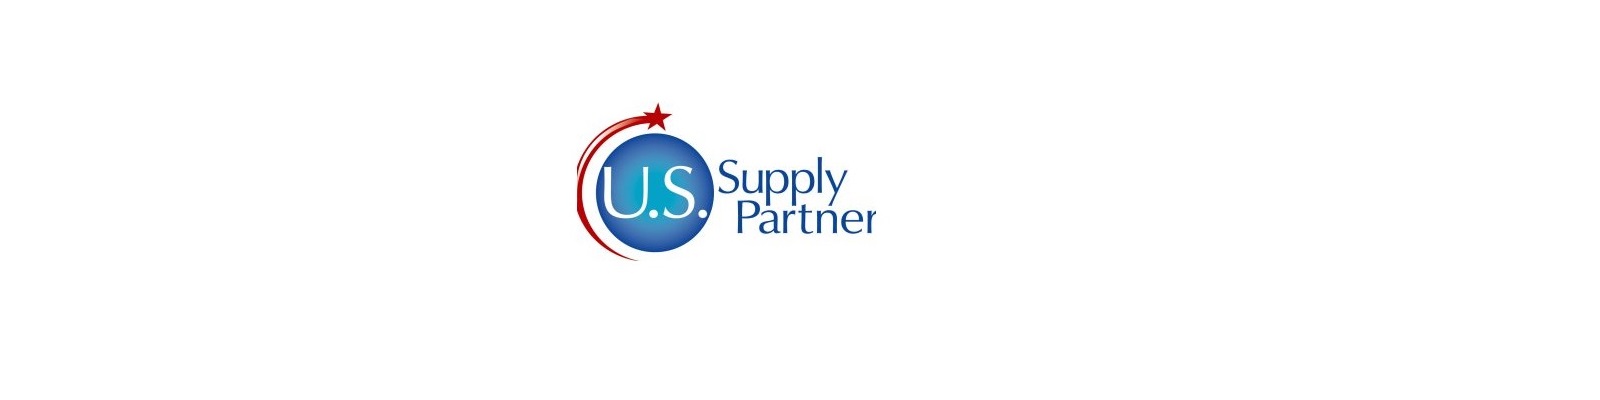 US Supply Partner Cover Image